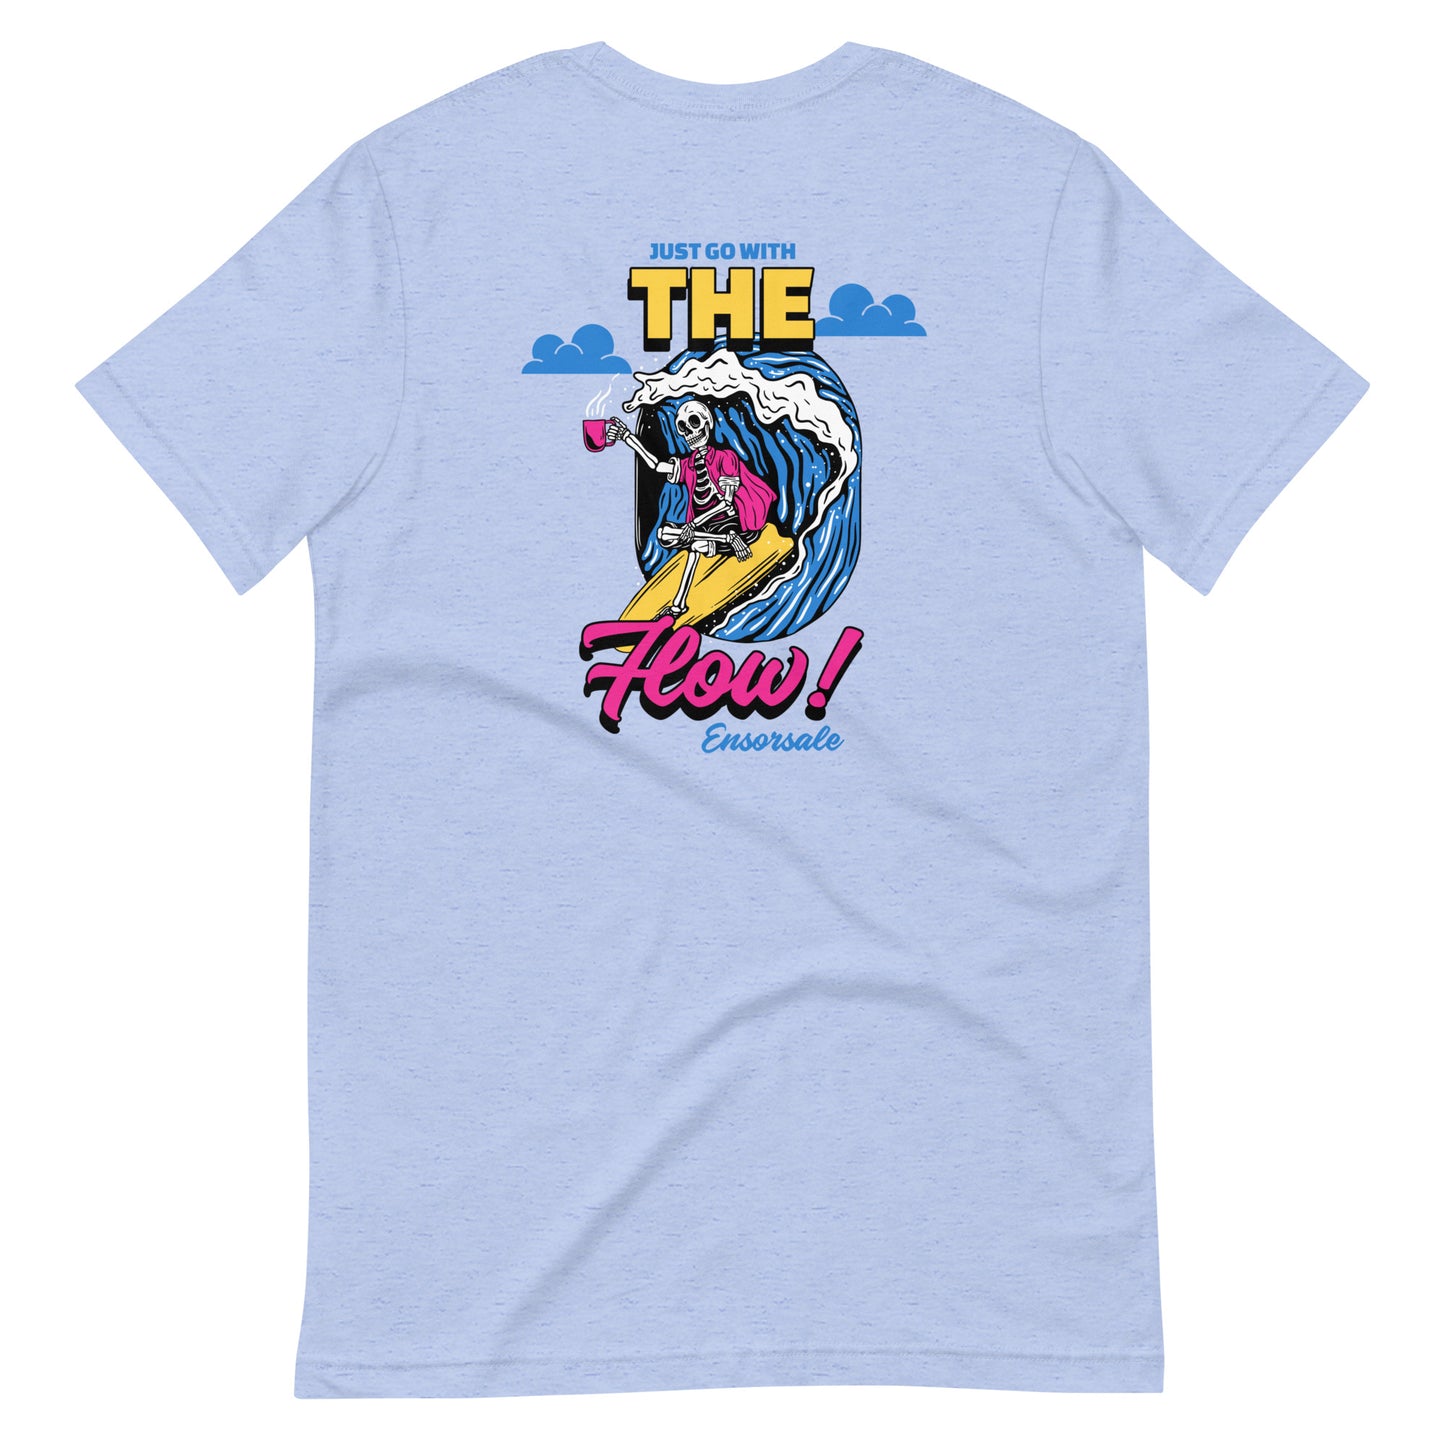 Just Go With the Flow Ensorsale T-Shirt